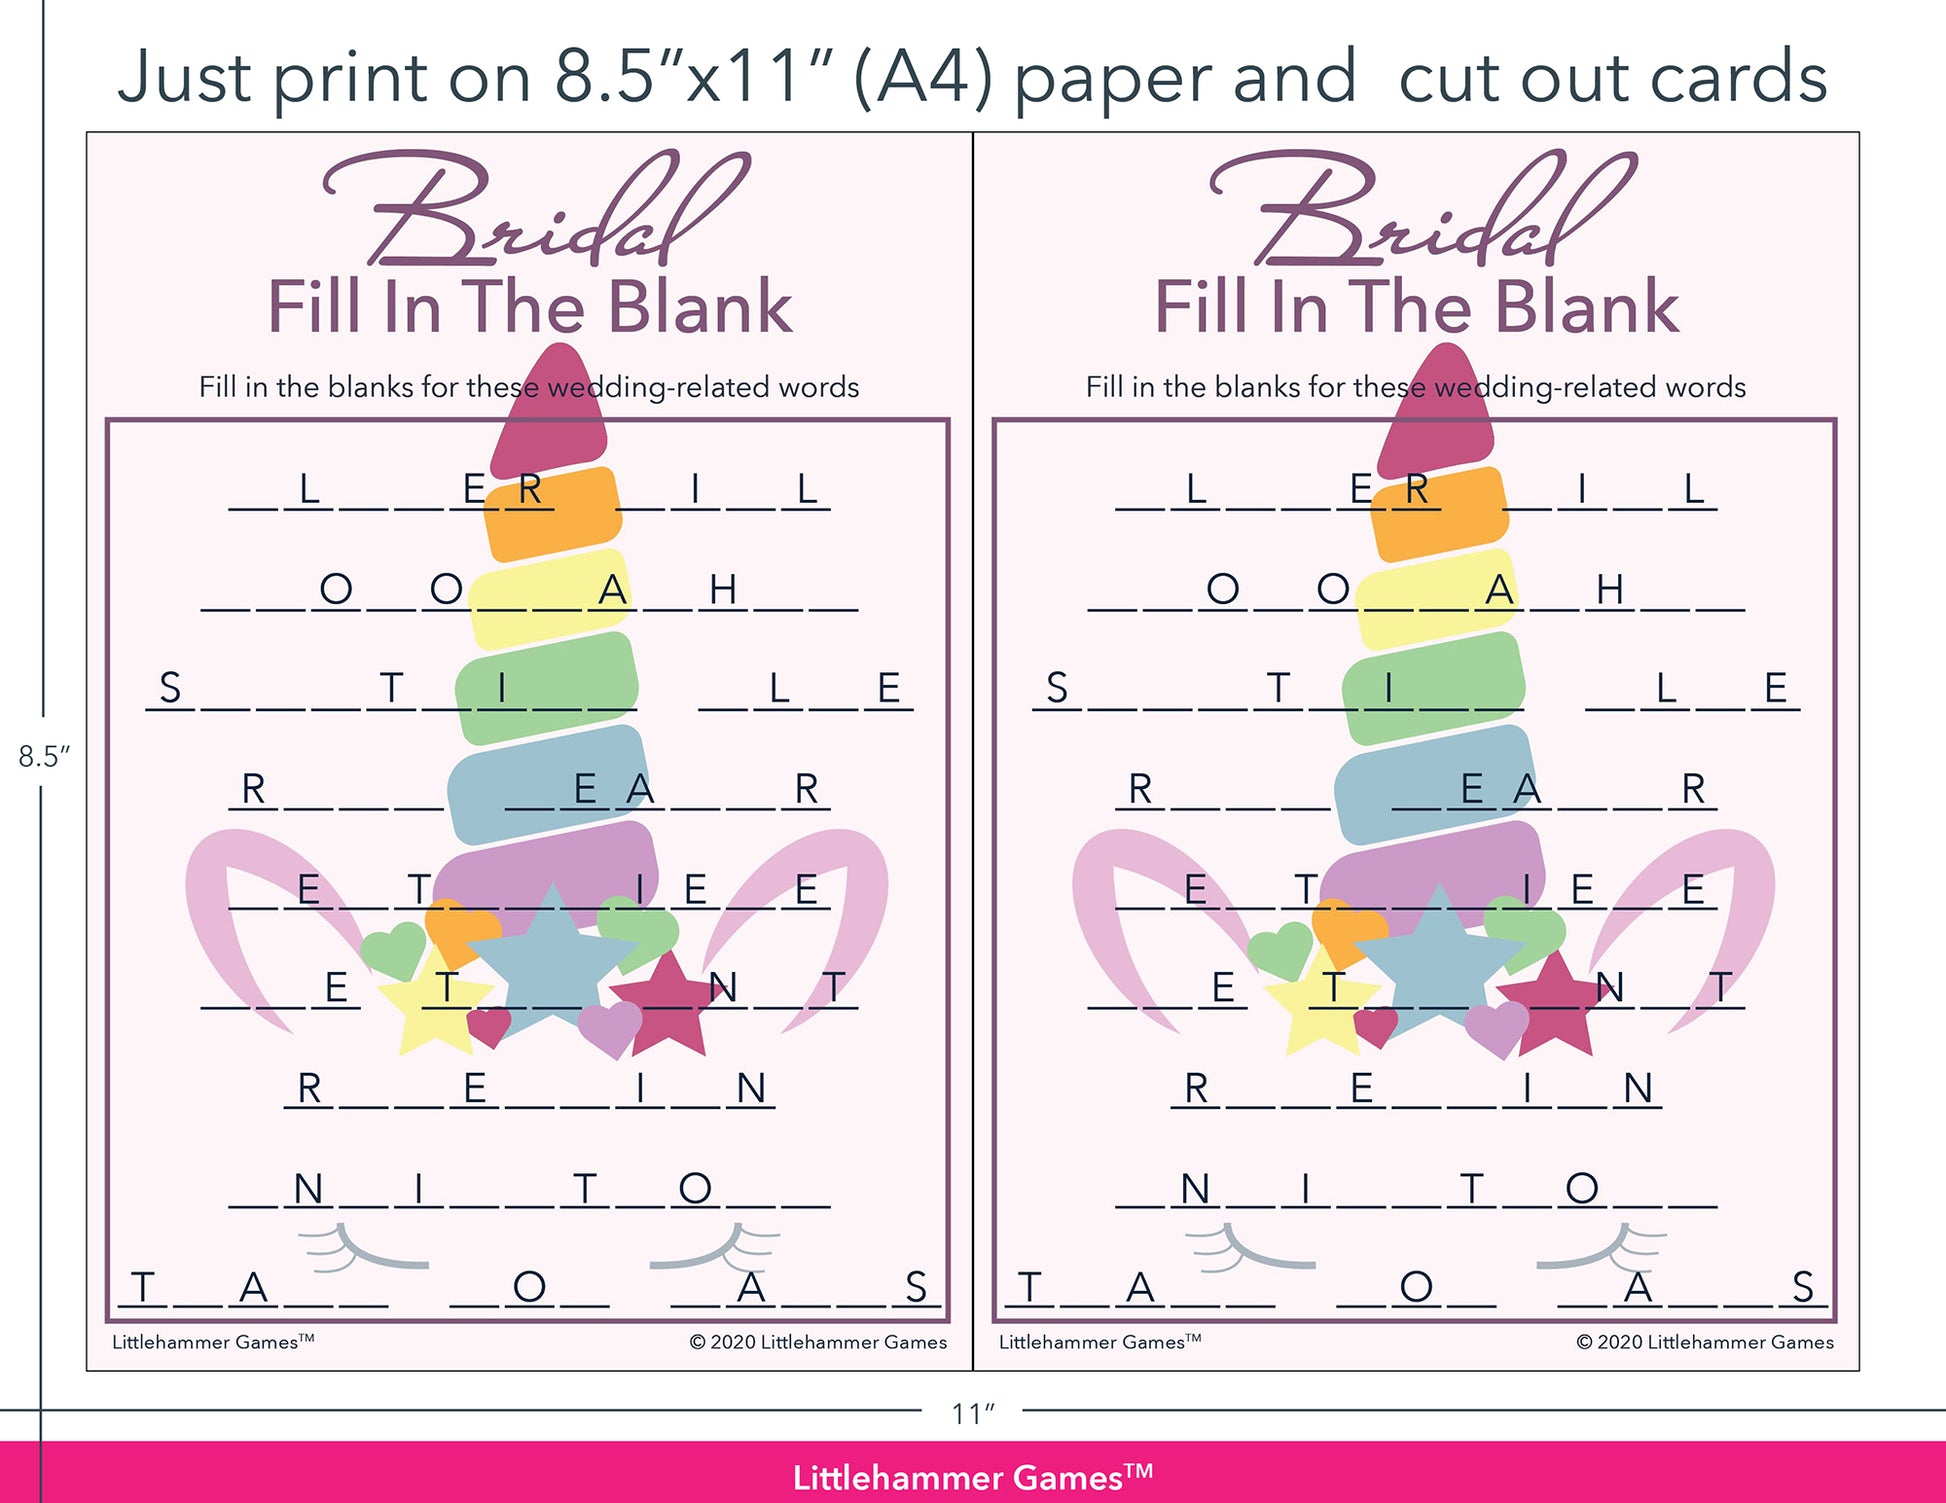 Bridal Fill in the Blank unicorn game cards with printing instructions